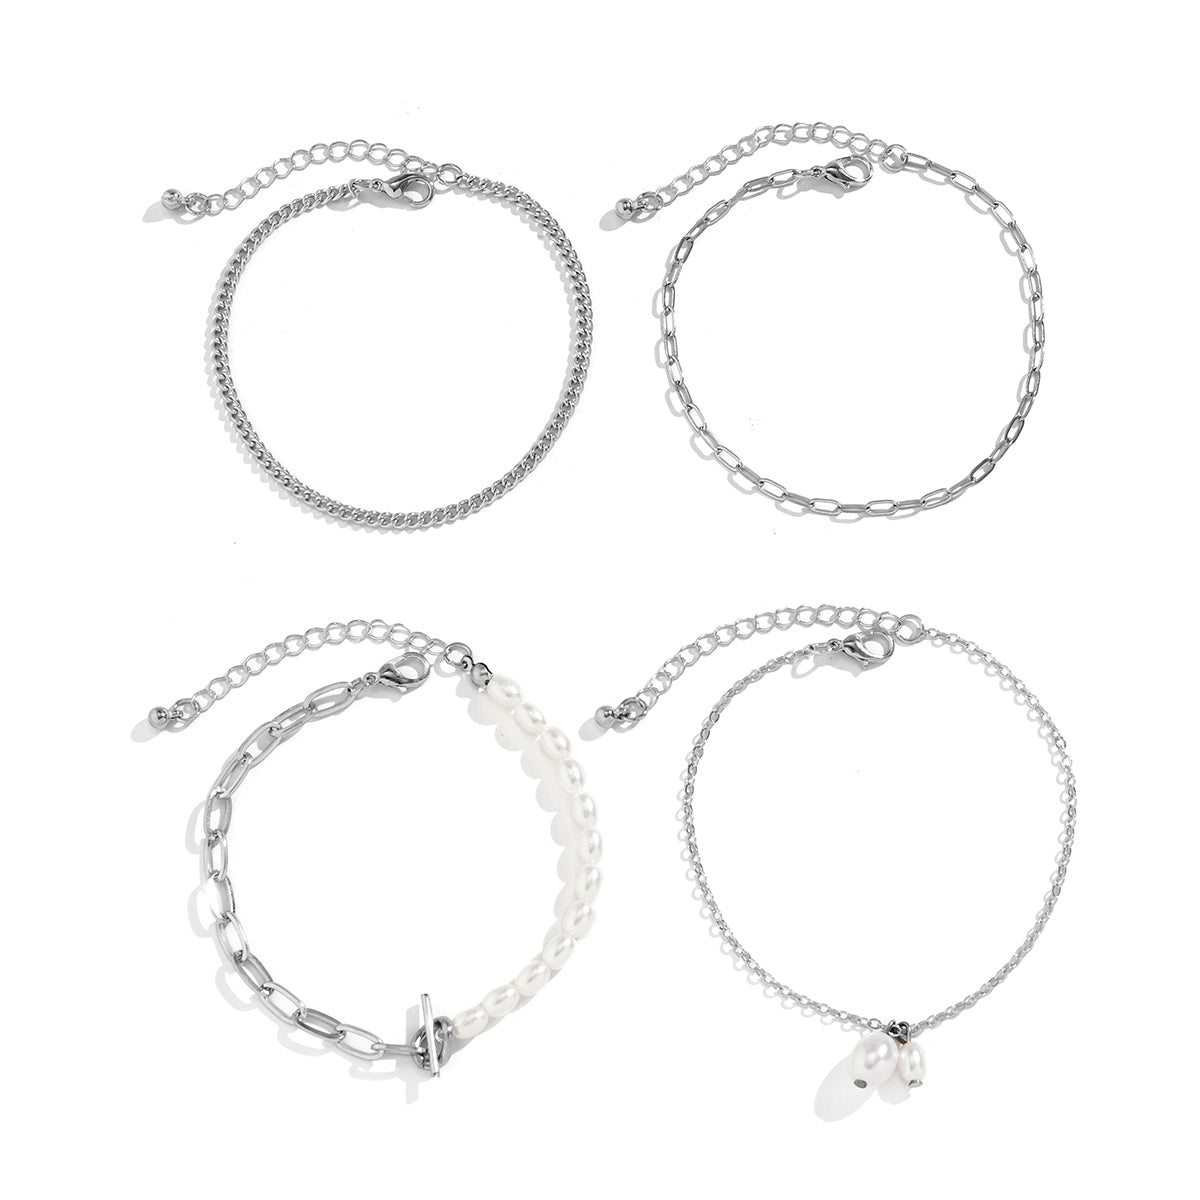 Pearl & Silver-Plated Four-Piece Anklet Set